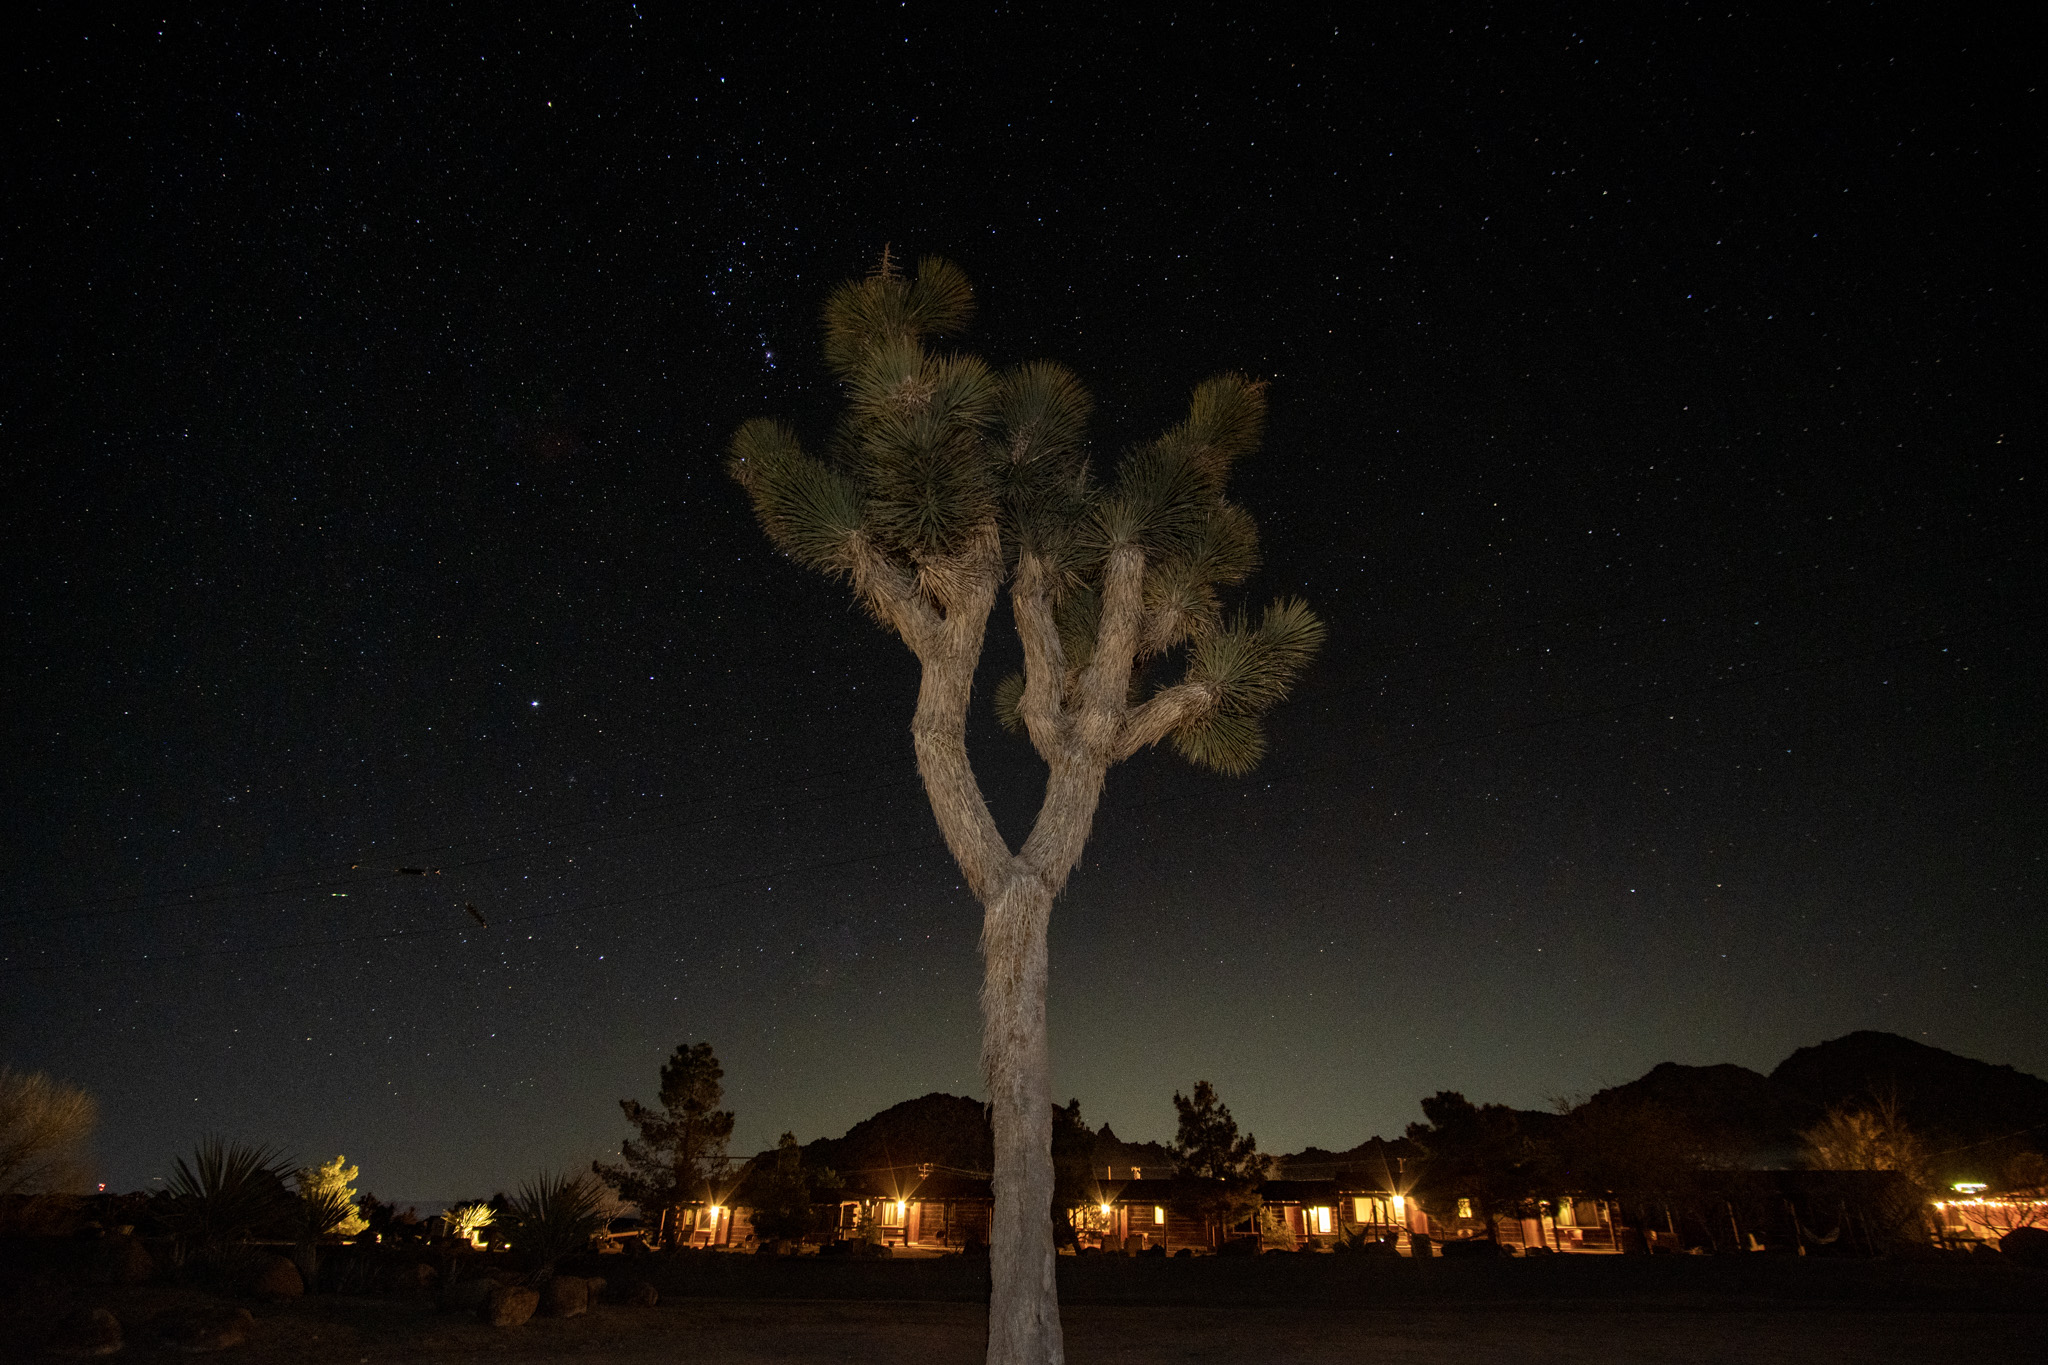 Night time. A Joshua tree is in the center of frame, with a low motel dotted with orange light sitting in the distance. The sky is dotted with stars and a faint orange glow on the horizon.